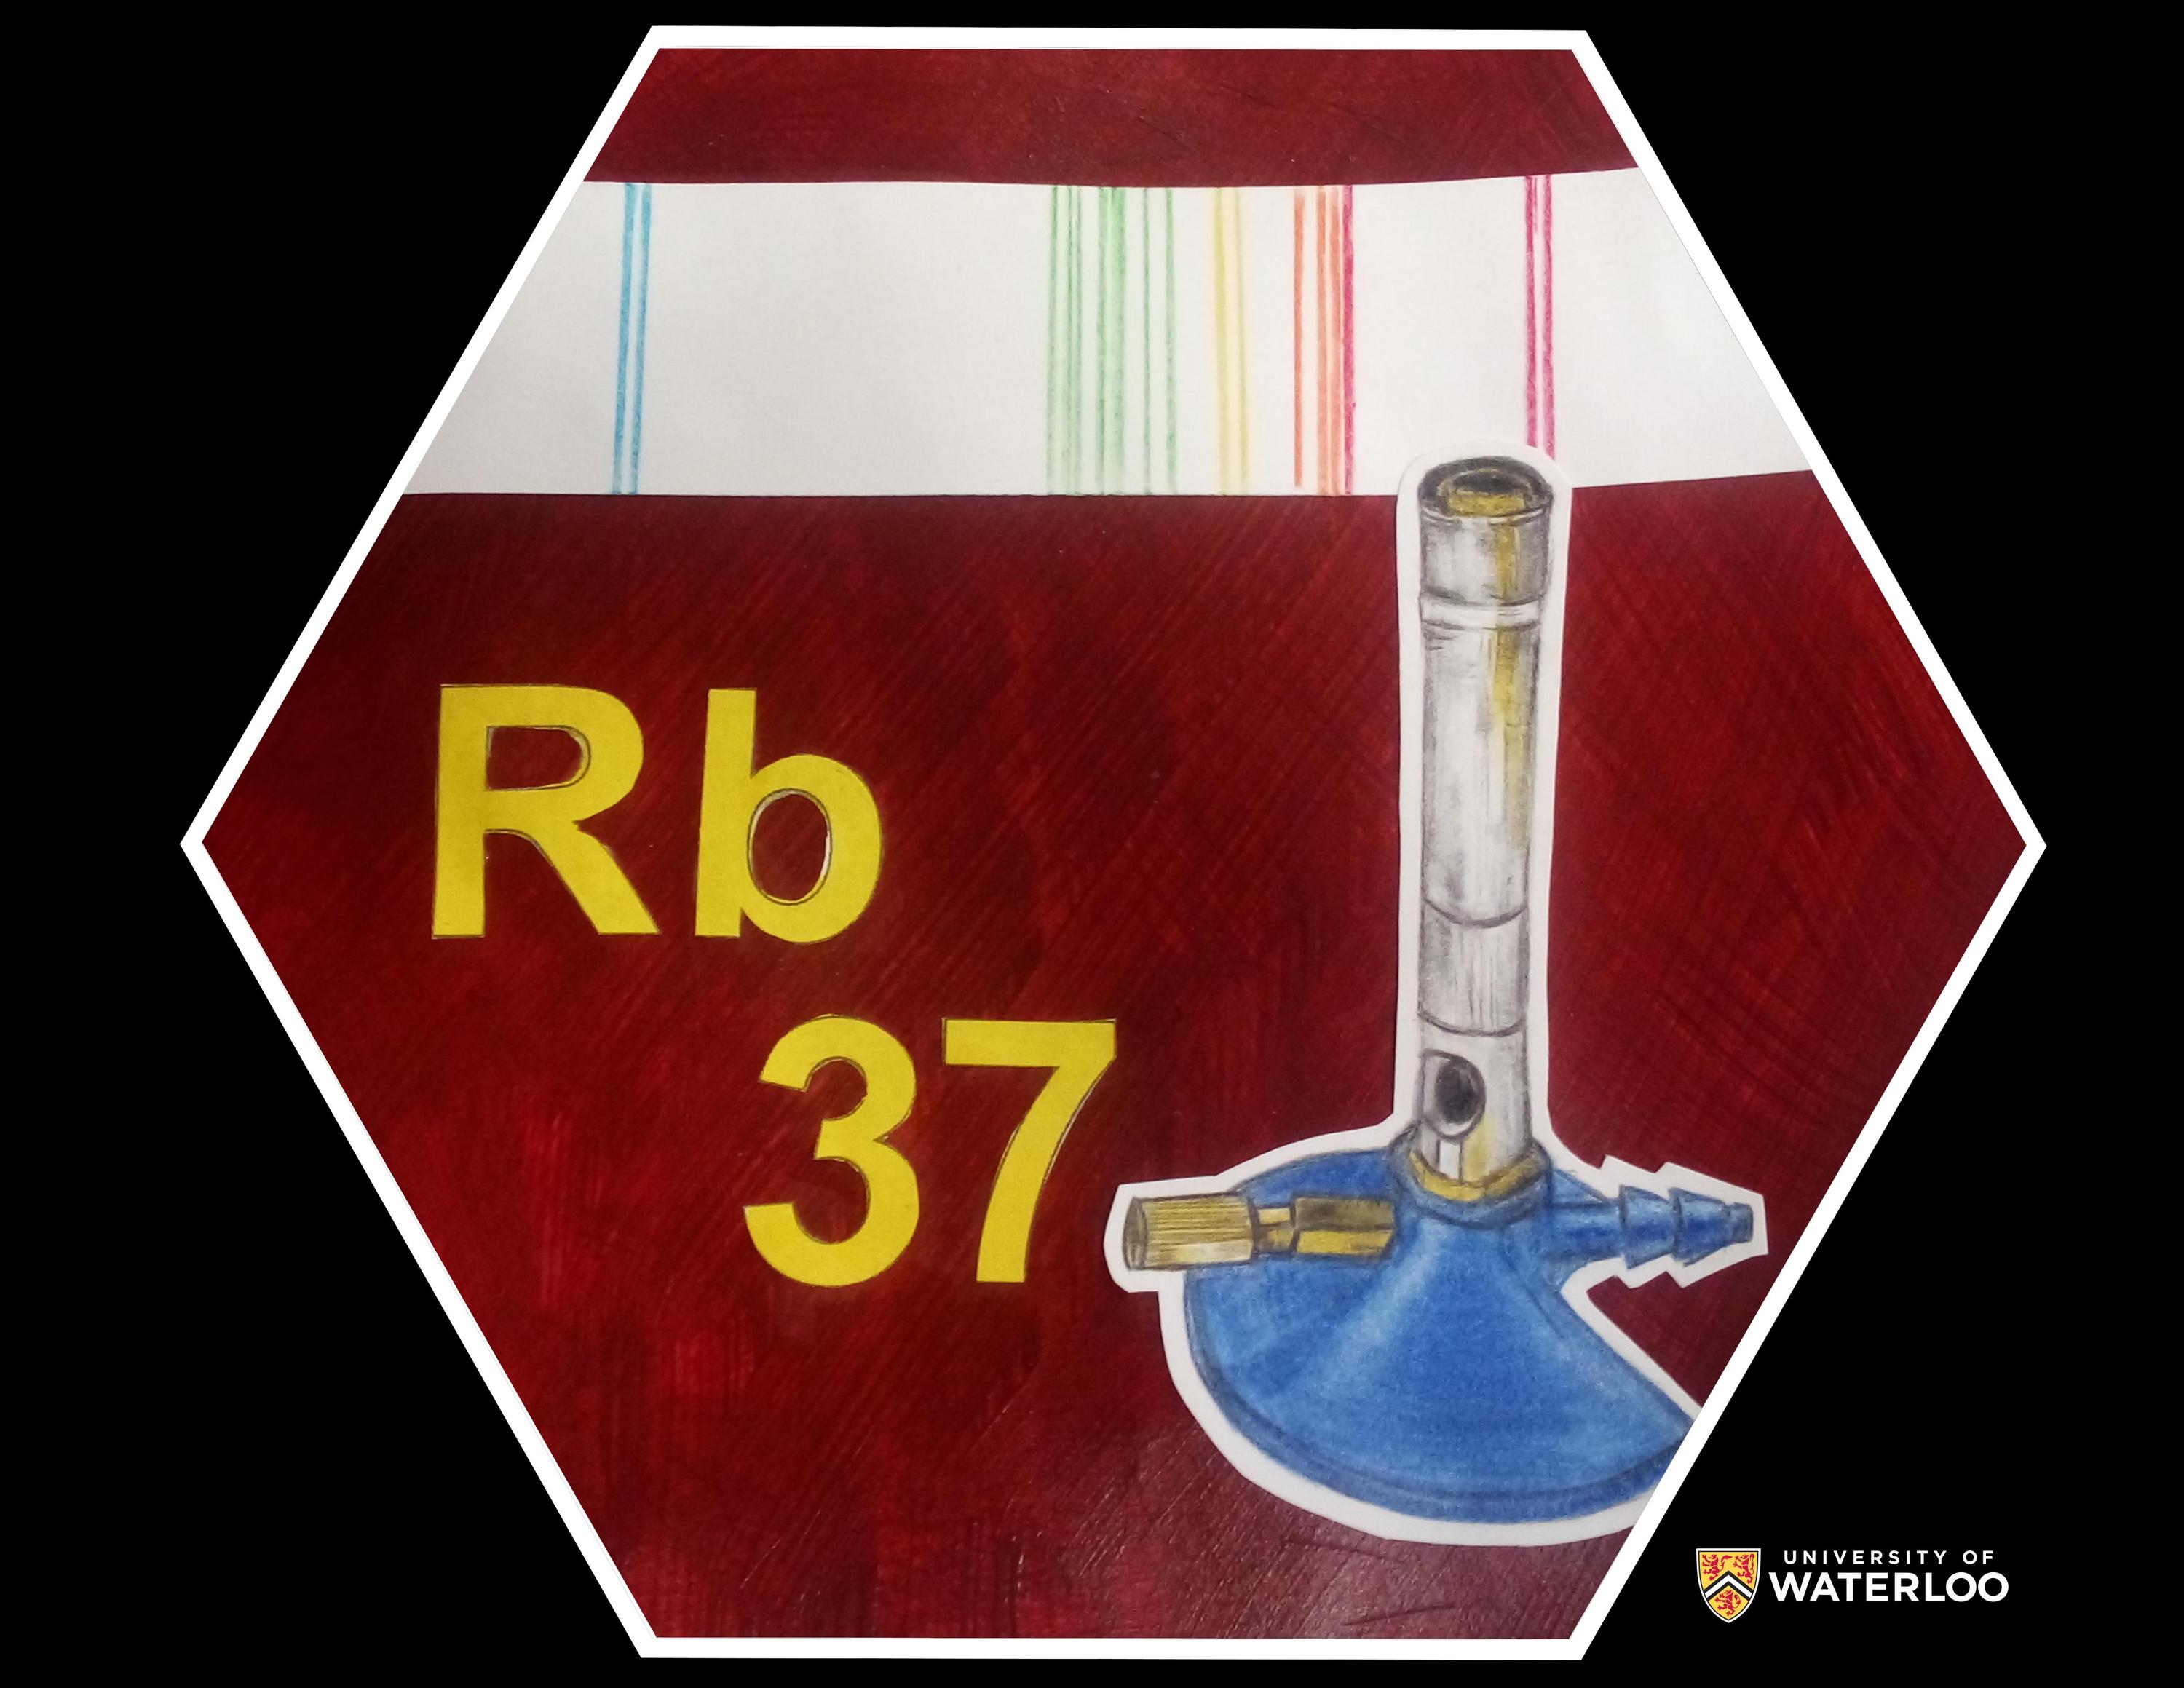 Mixed media (paint, pencil, and ink). Chemical symbol “Rb” and atomic number “37” are in yellow on a ruby red background. A spectrum with lines in blue, green, yellow, orange and red crosses the top of the tile. A large Bunsen burner is right.